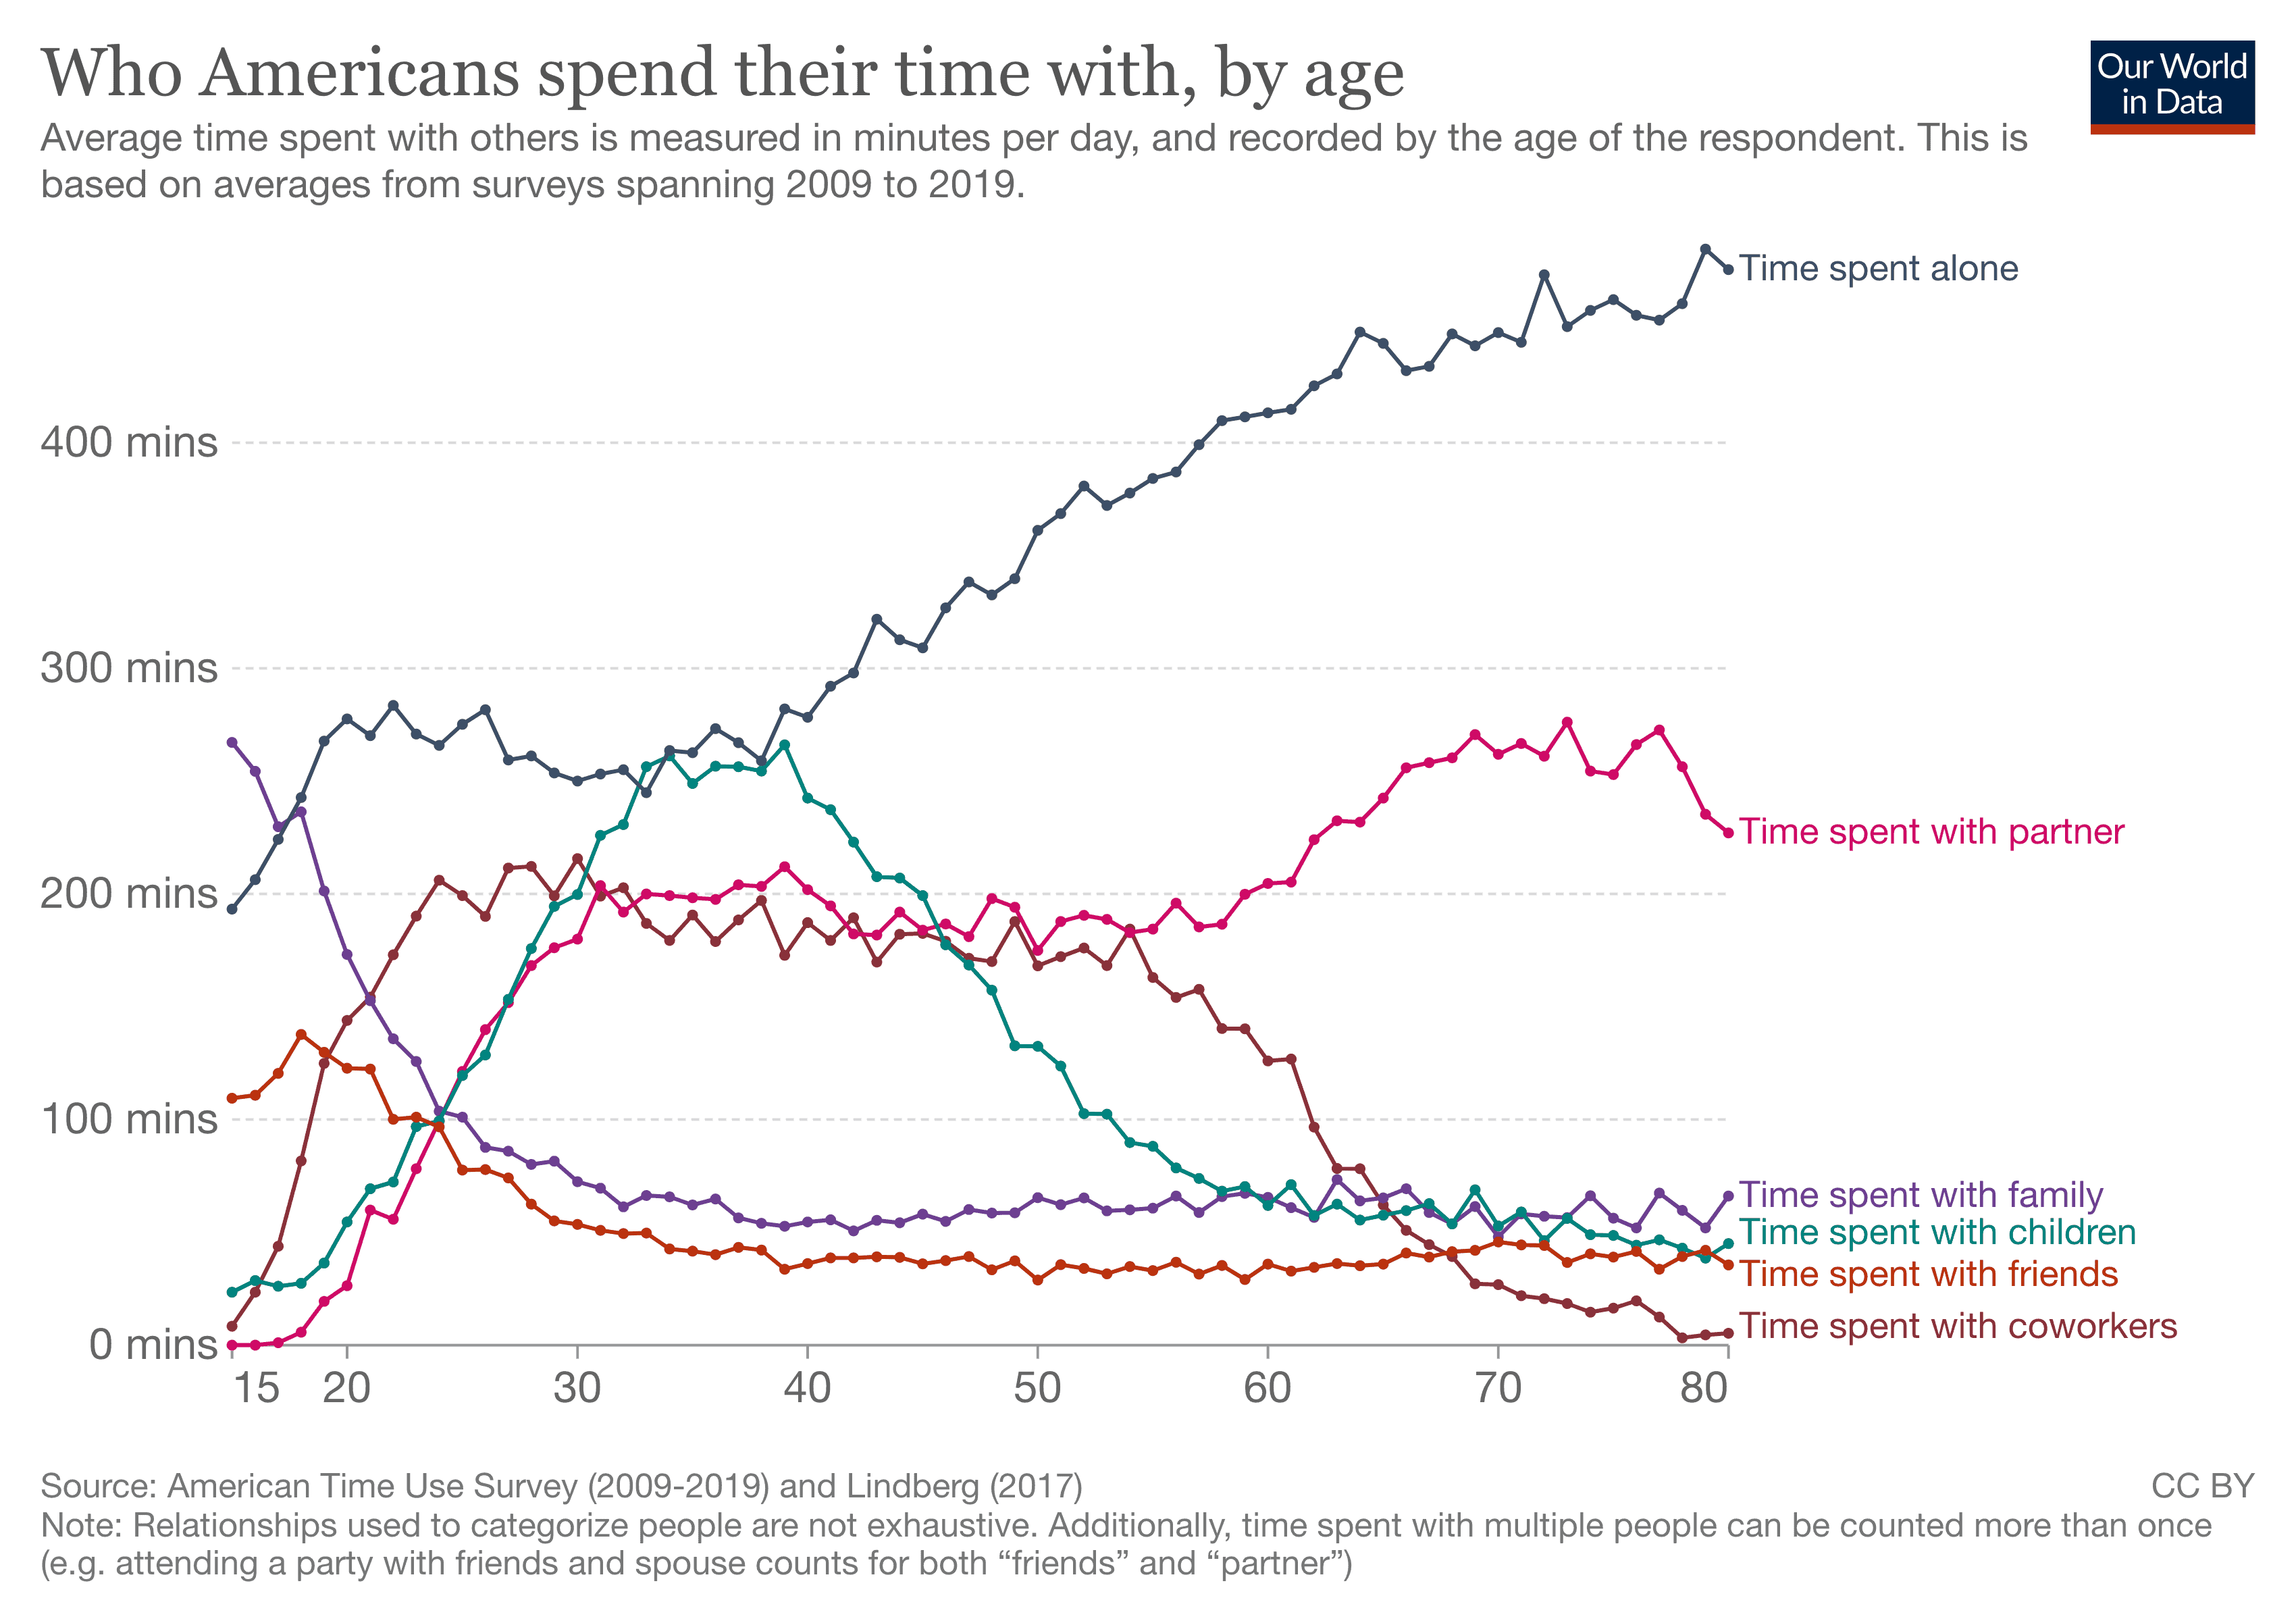 Chart showing who Americans spend their time with by age.